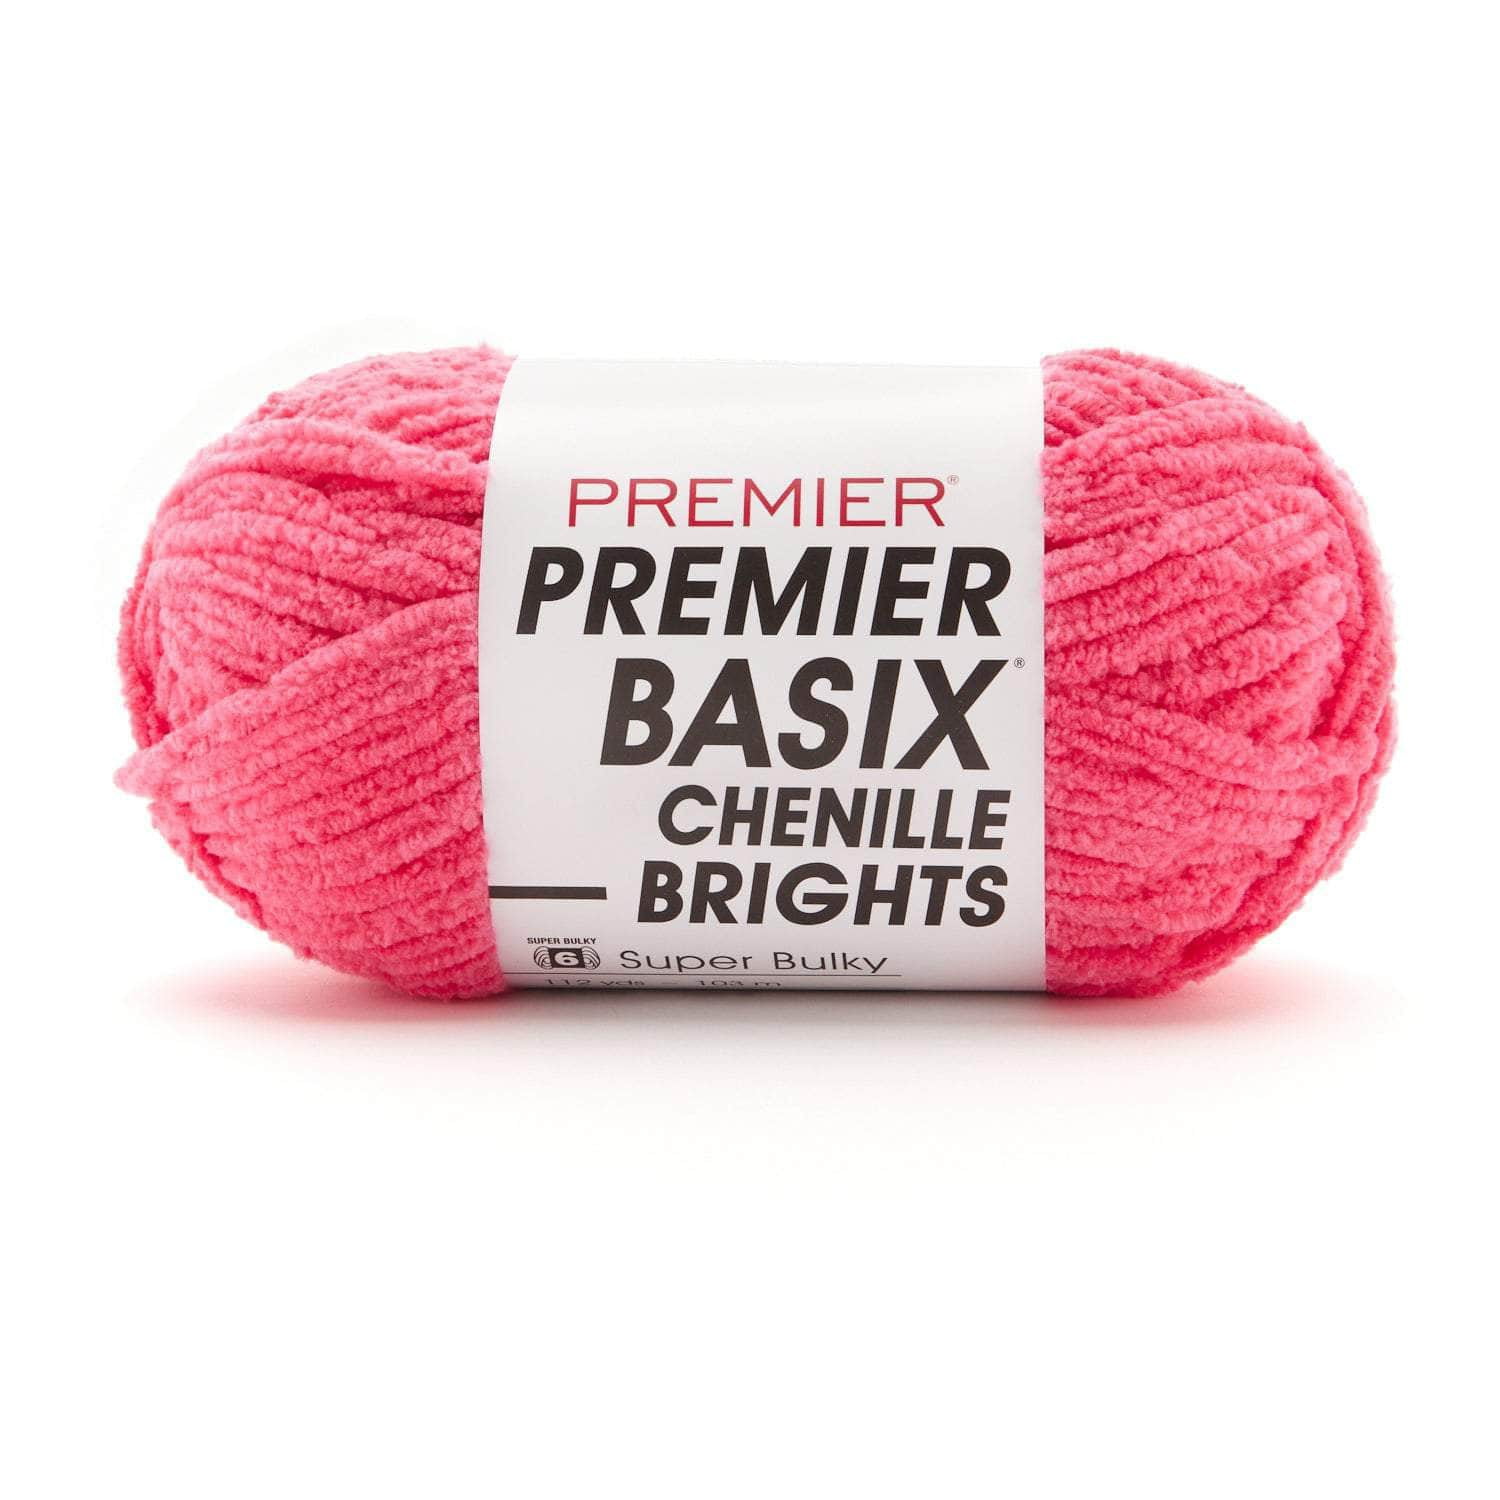 Premier Yarns Basix Chenille Brights Yarn - 5.3 Oz - #6 Super Bulky Weight  - 3 Pack Bundle with Bella's Crafts Stitch Markers (White)